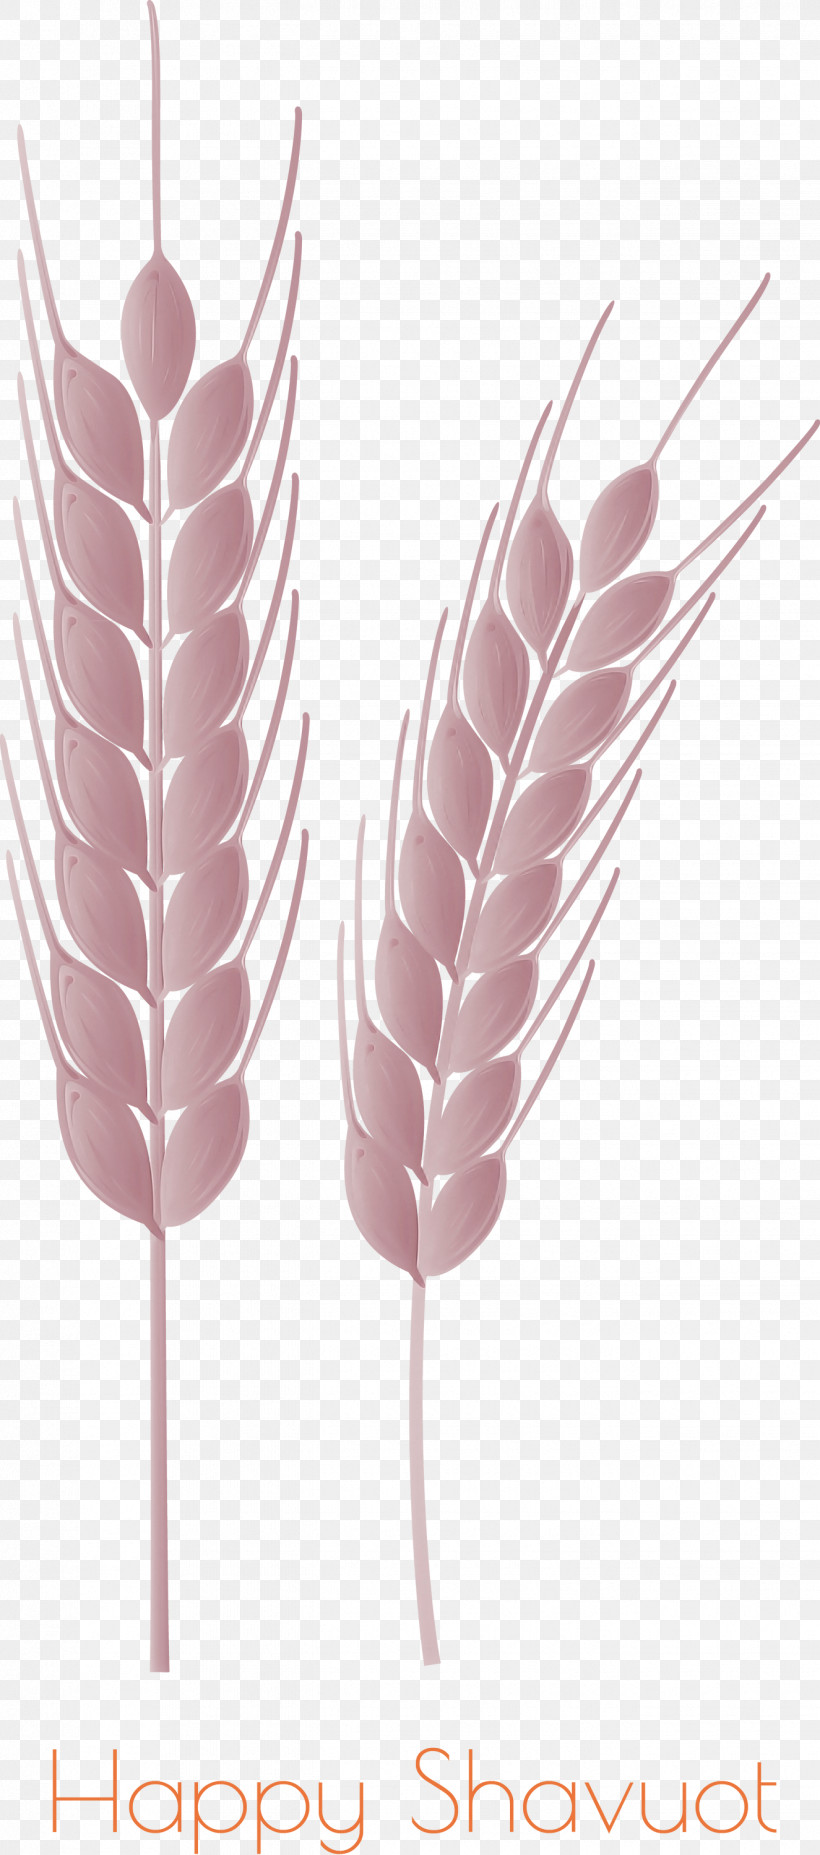 Happy Shavuot Shavuot Shovuos, PNG, 1325x2999px, Happy Shavuot, Feather, Food Grain, Grass Family, Pink Download Free